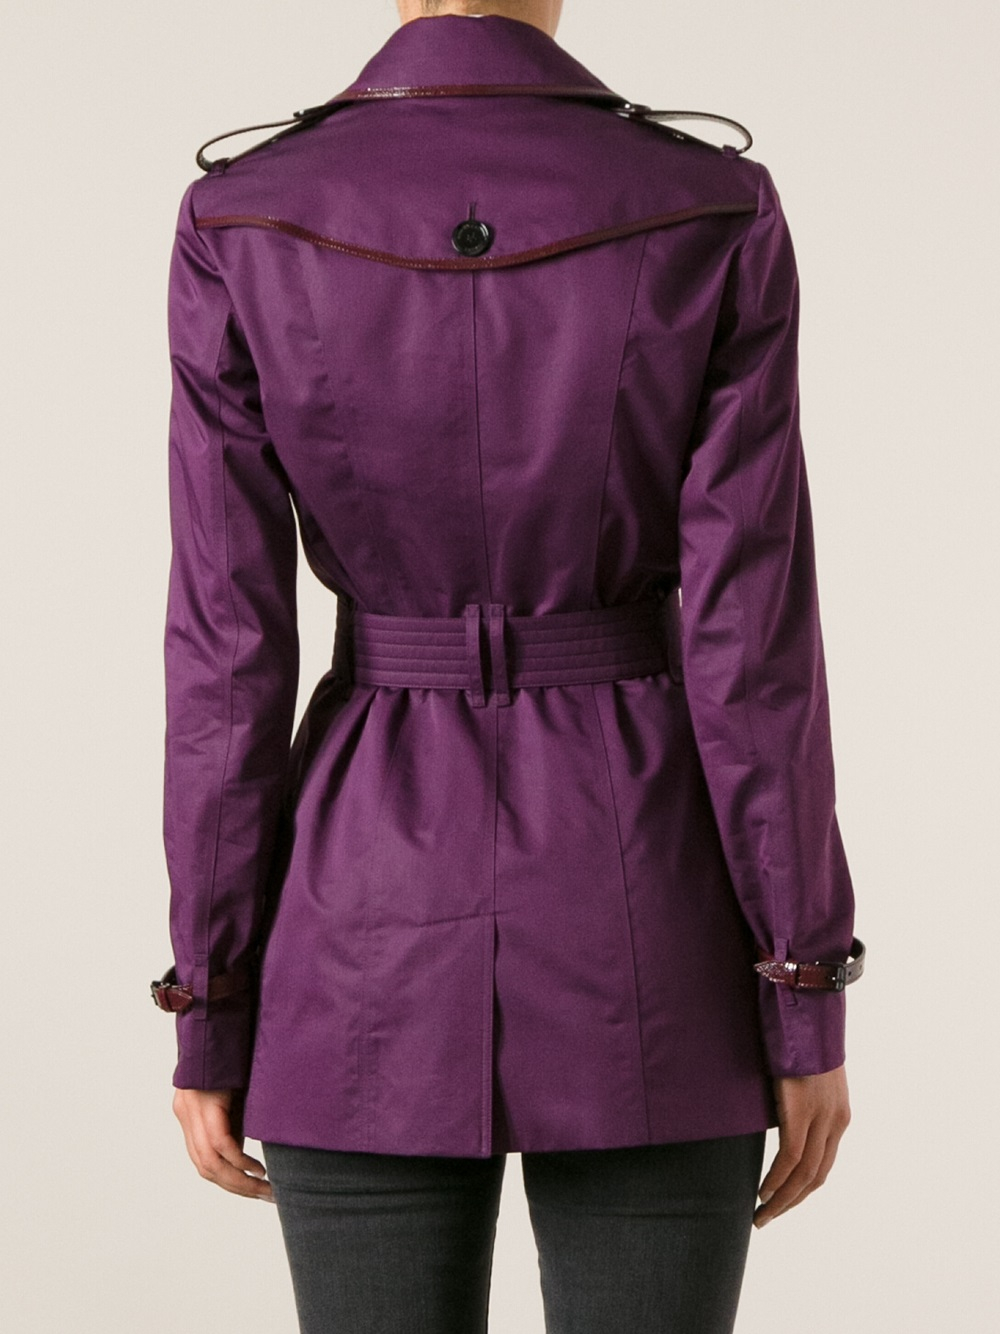 Lyst - Burberry Belted Trench Coat in Purple